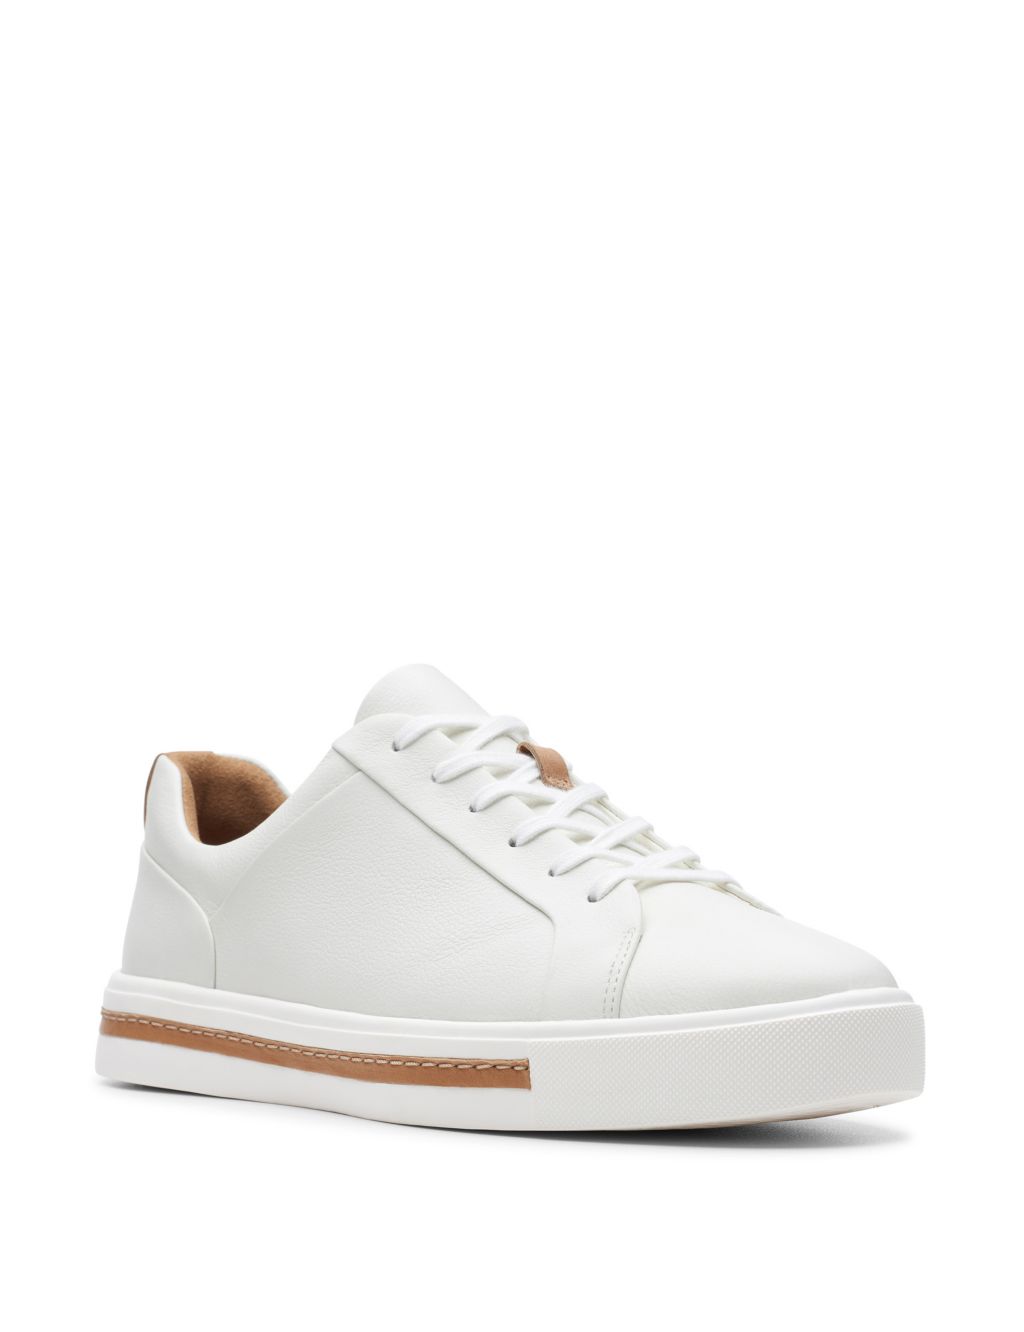 Wide Fit Leather Lace Up Trainers image 2